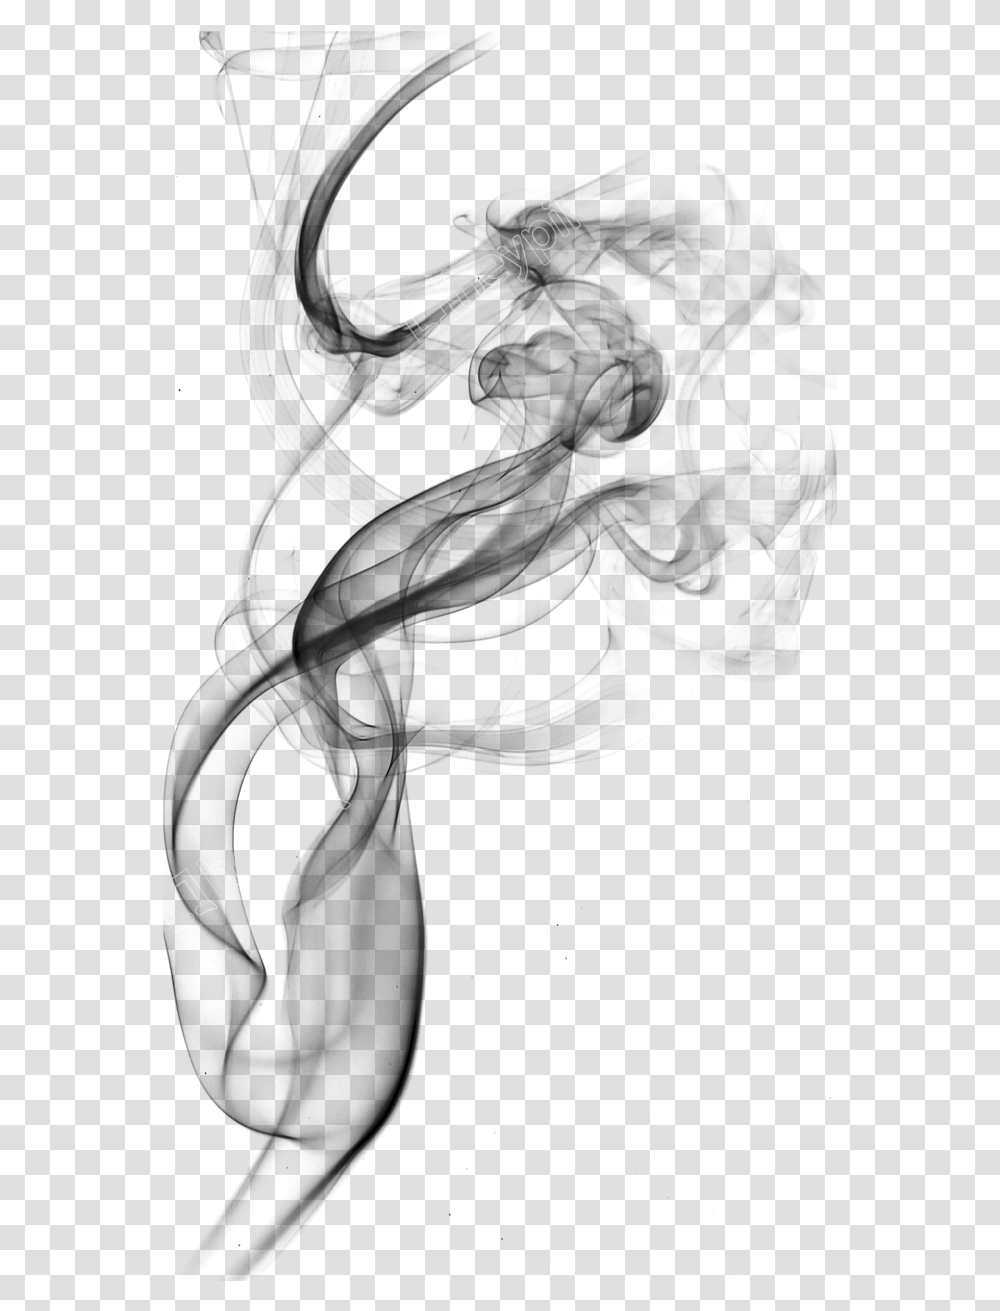 Smoke Illustration Black And White Smoke, Outdoors, Nature, Leisure Activities Transparent Png